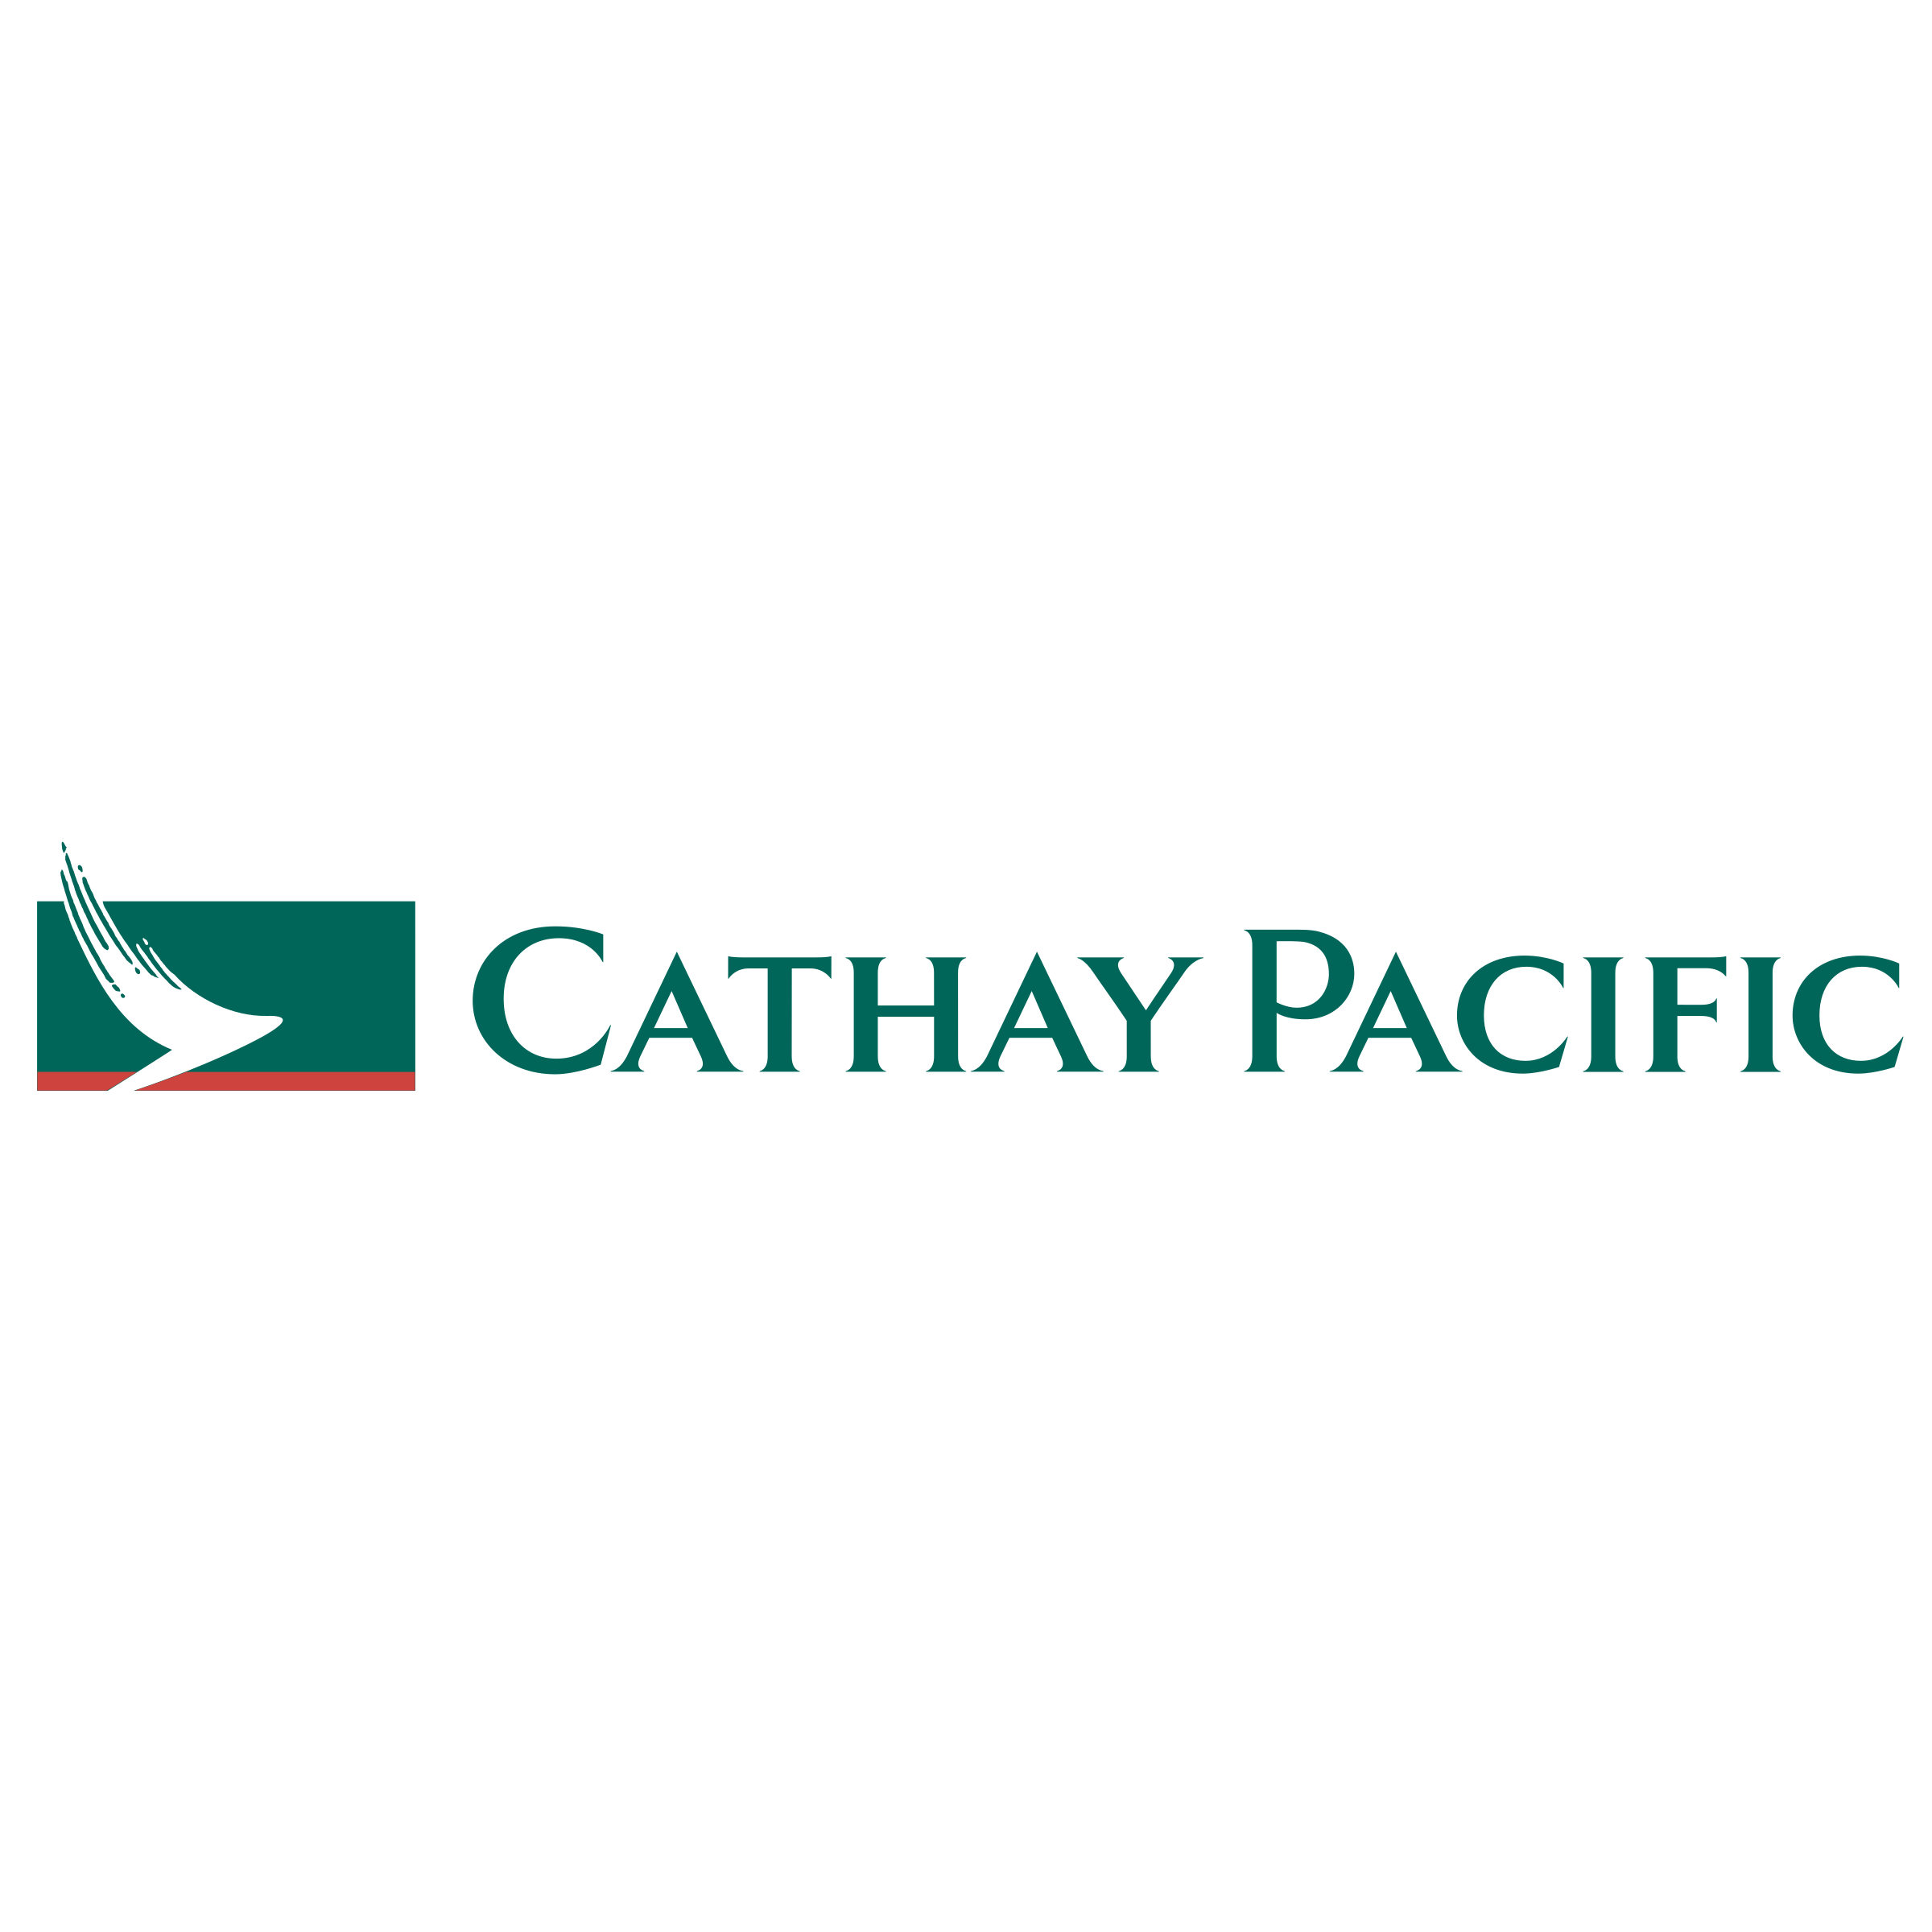 Detail Cathay Pacific Logo Transparent Nomer 3